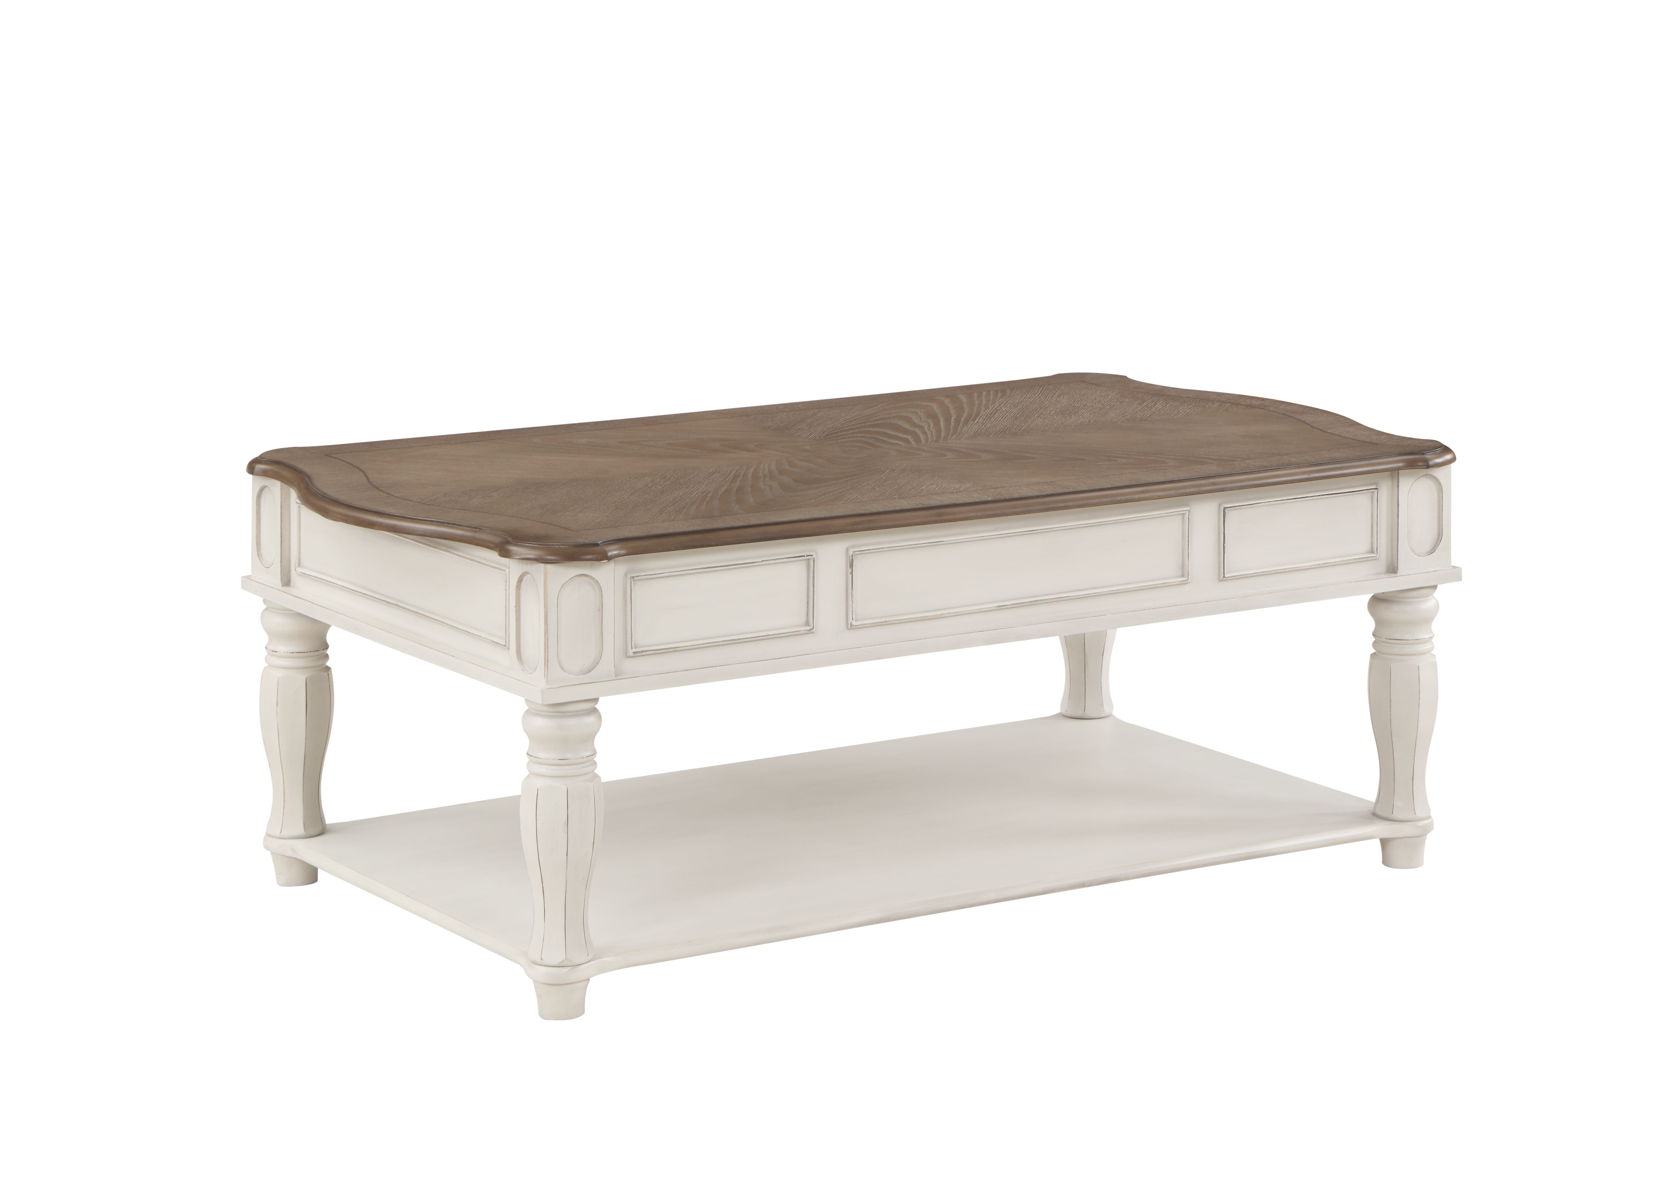 Acme Florian Coffee Table With Lift Top In Oak & Antique White Finish